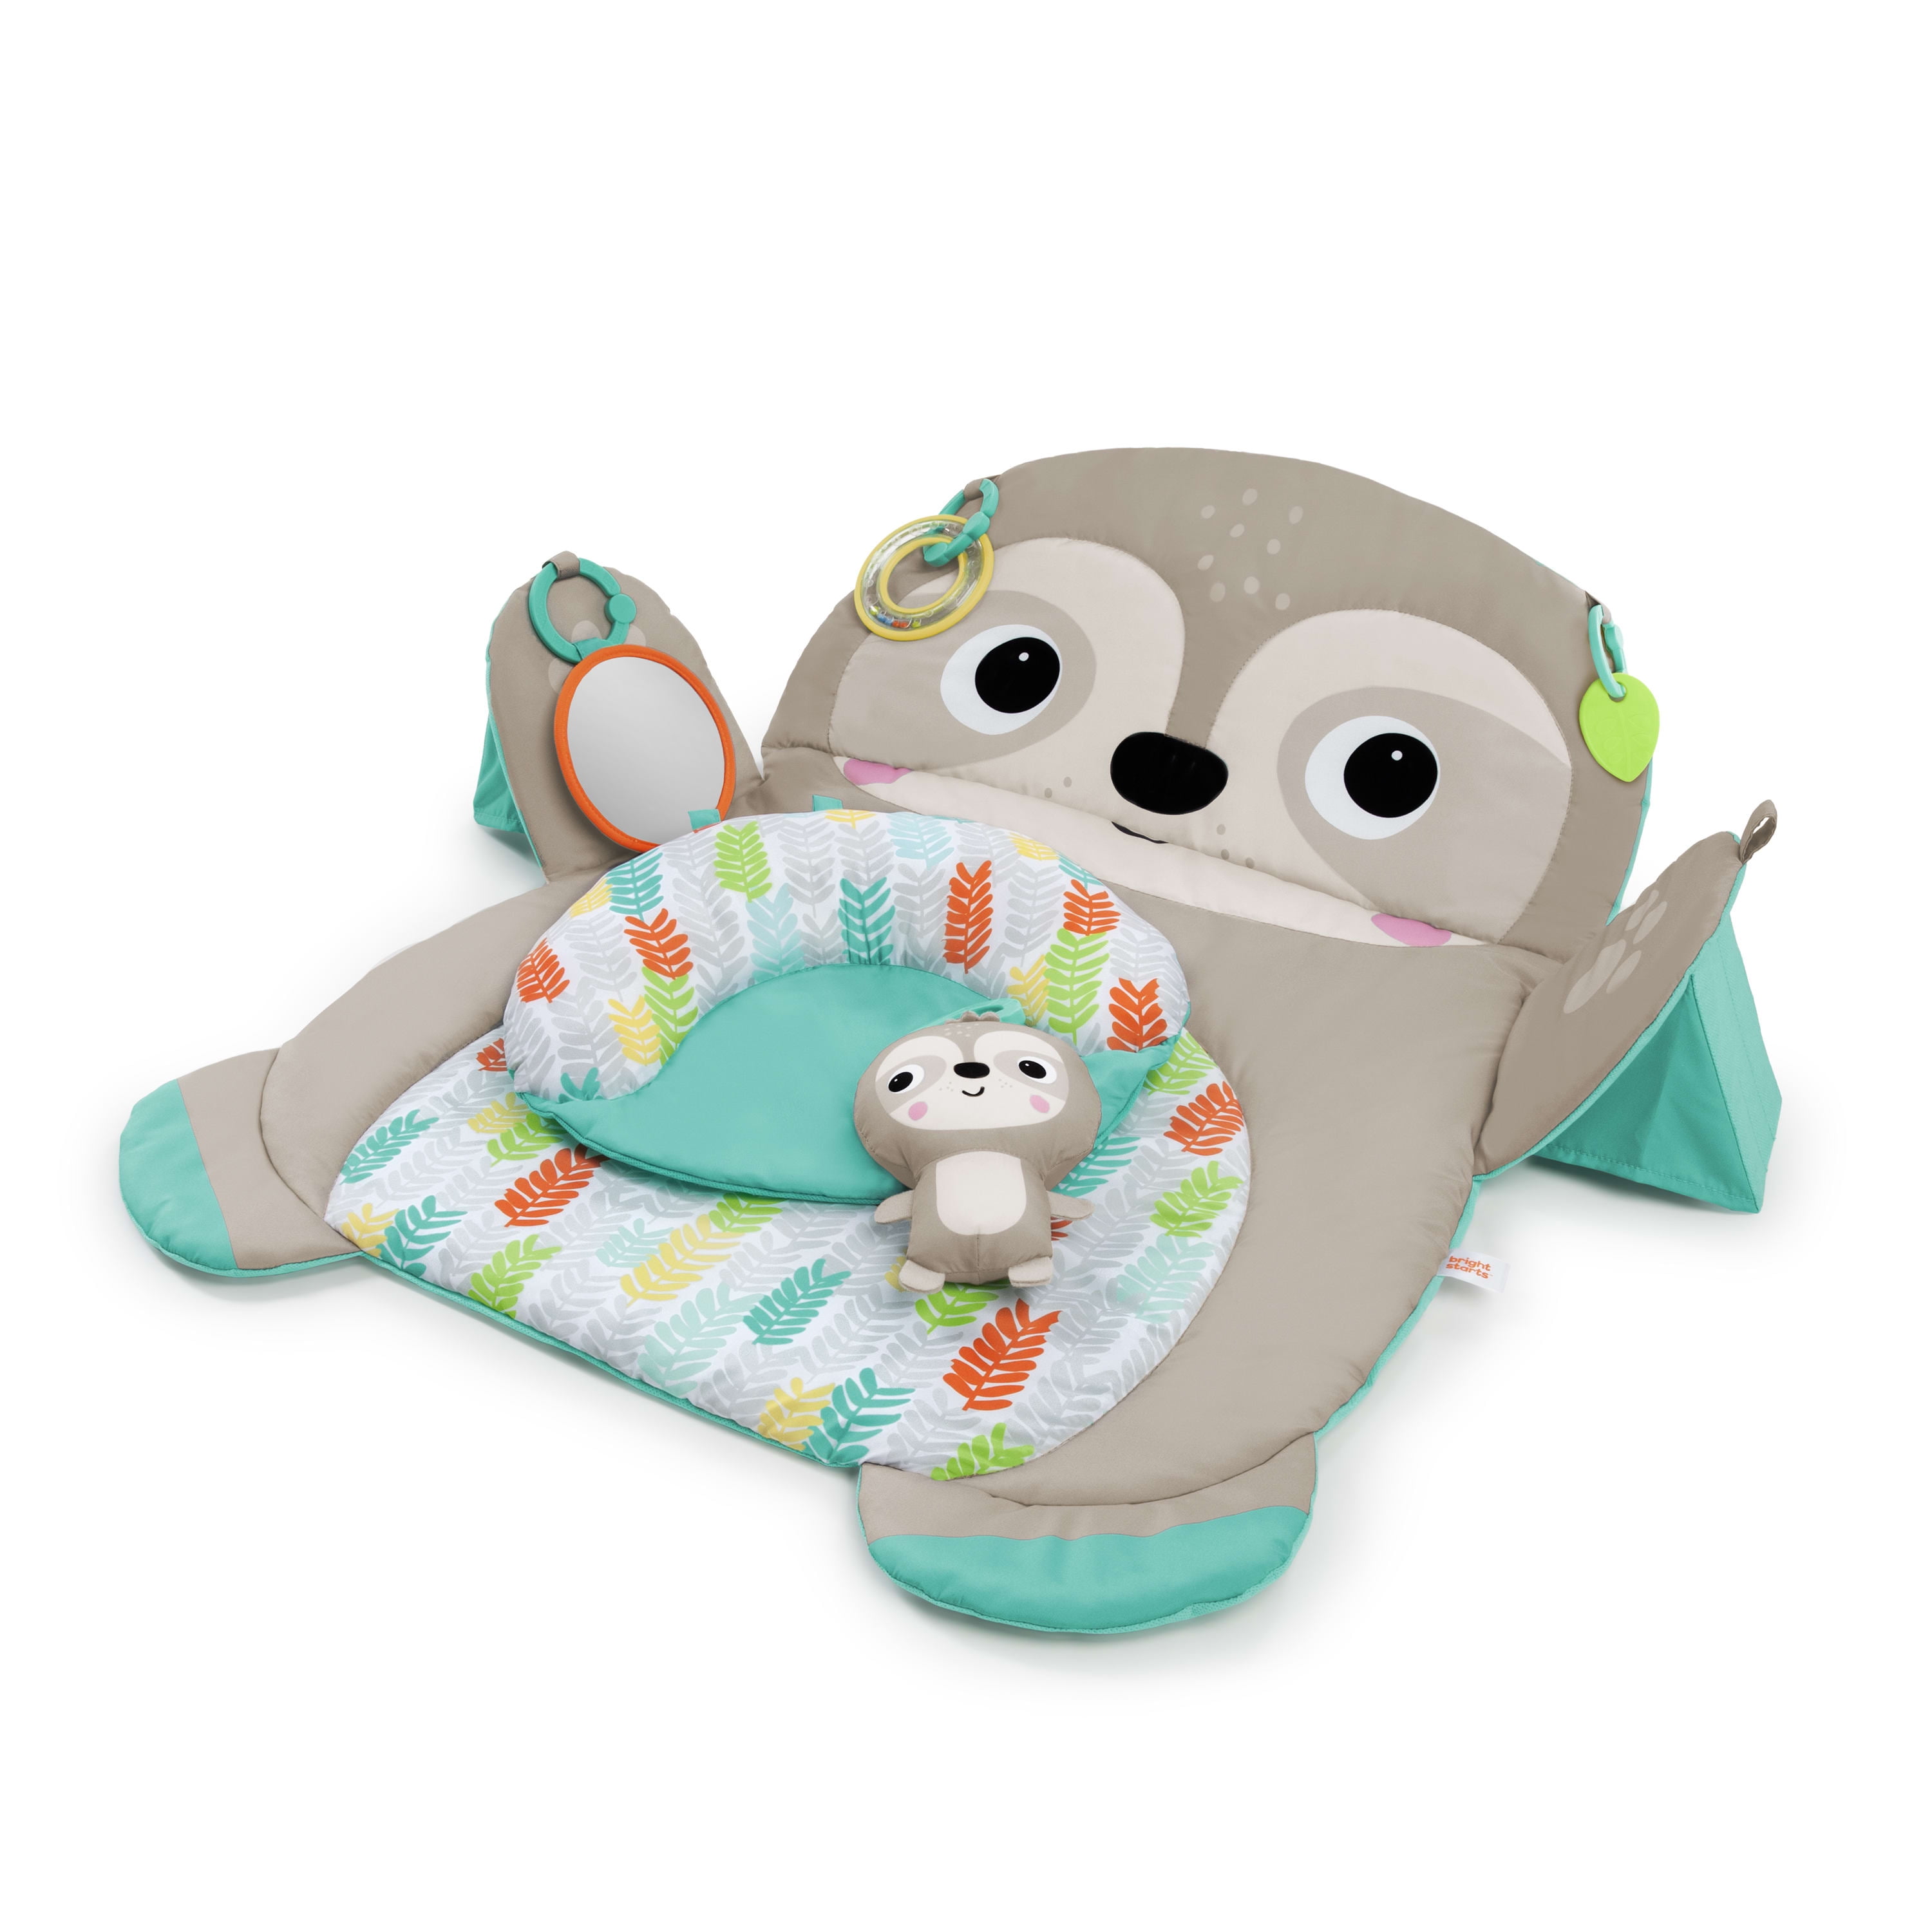 Bright Starts Tummy Time Prop & Play Baby Activity Mat for Infants, Sloth, Unisex